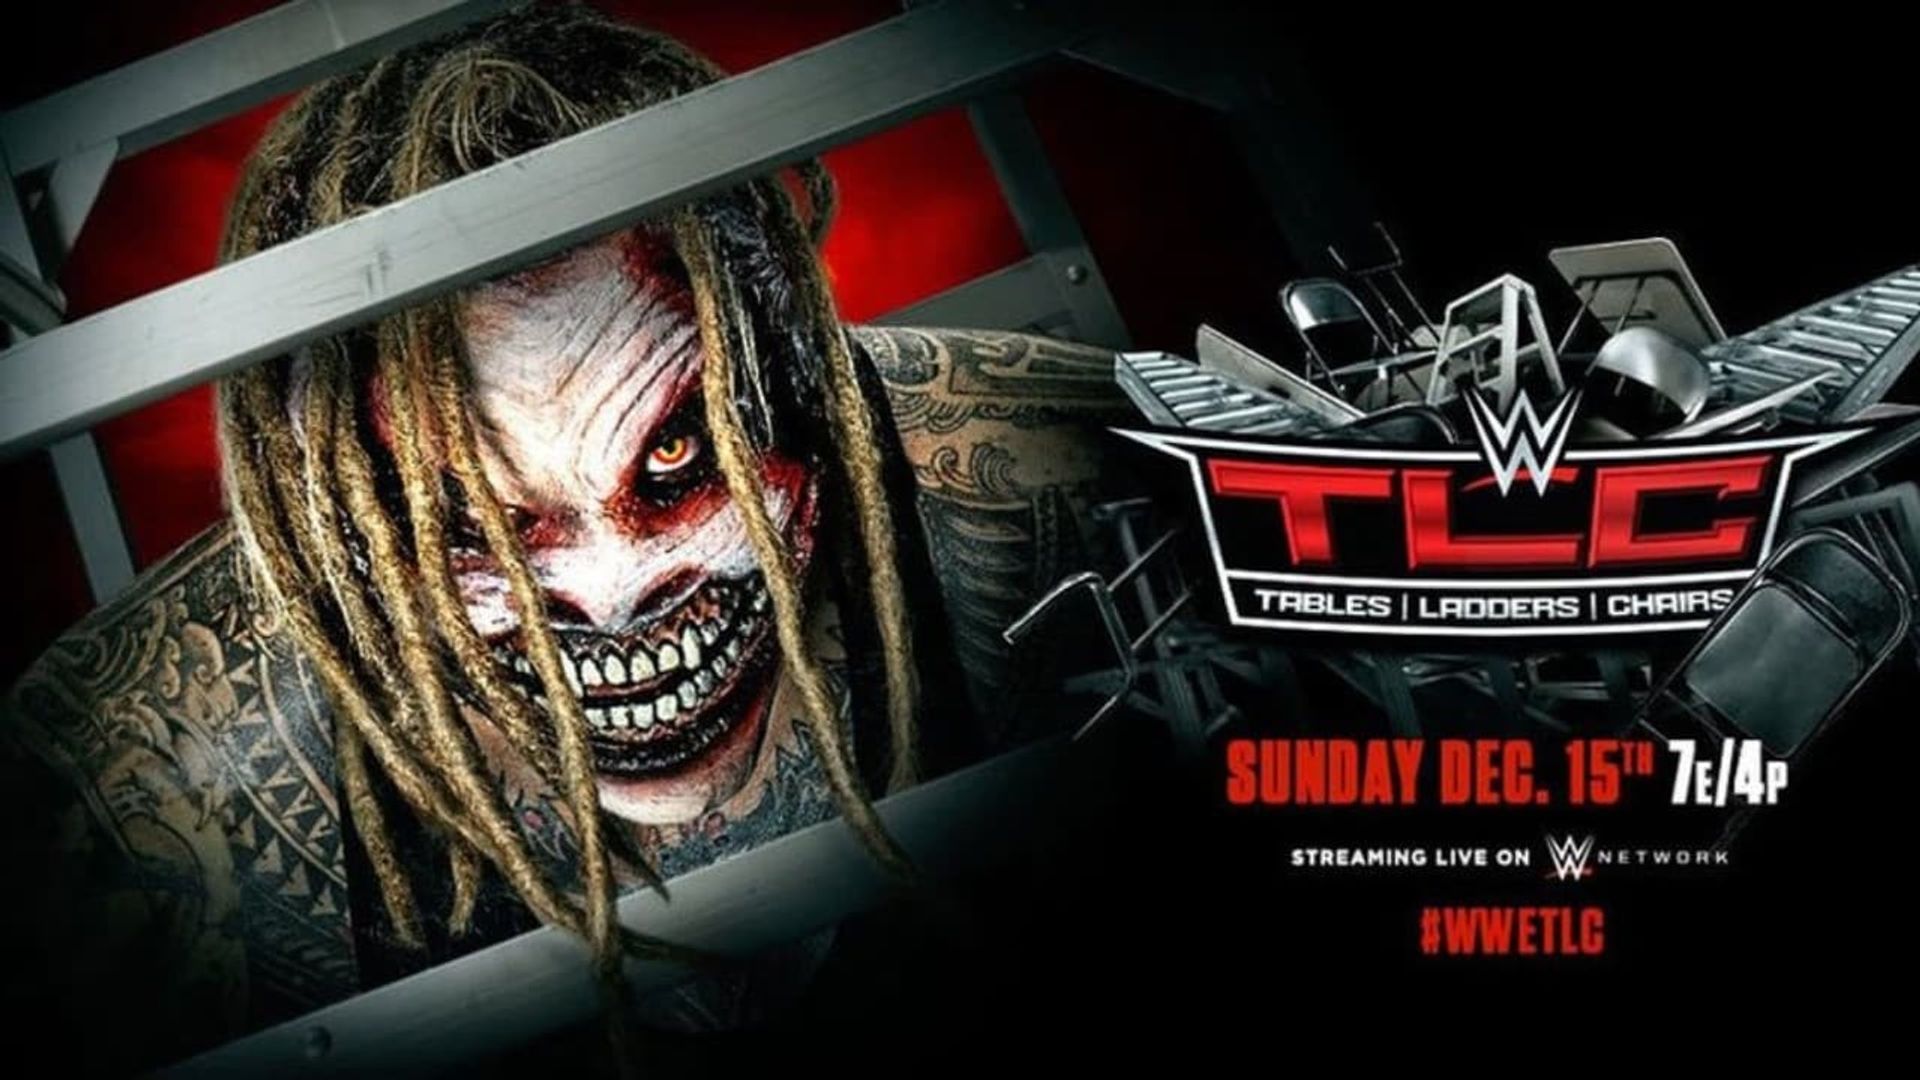 WWE TLC: Tables, Ladders & Chairs background